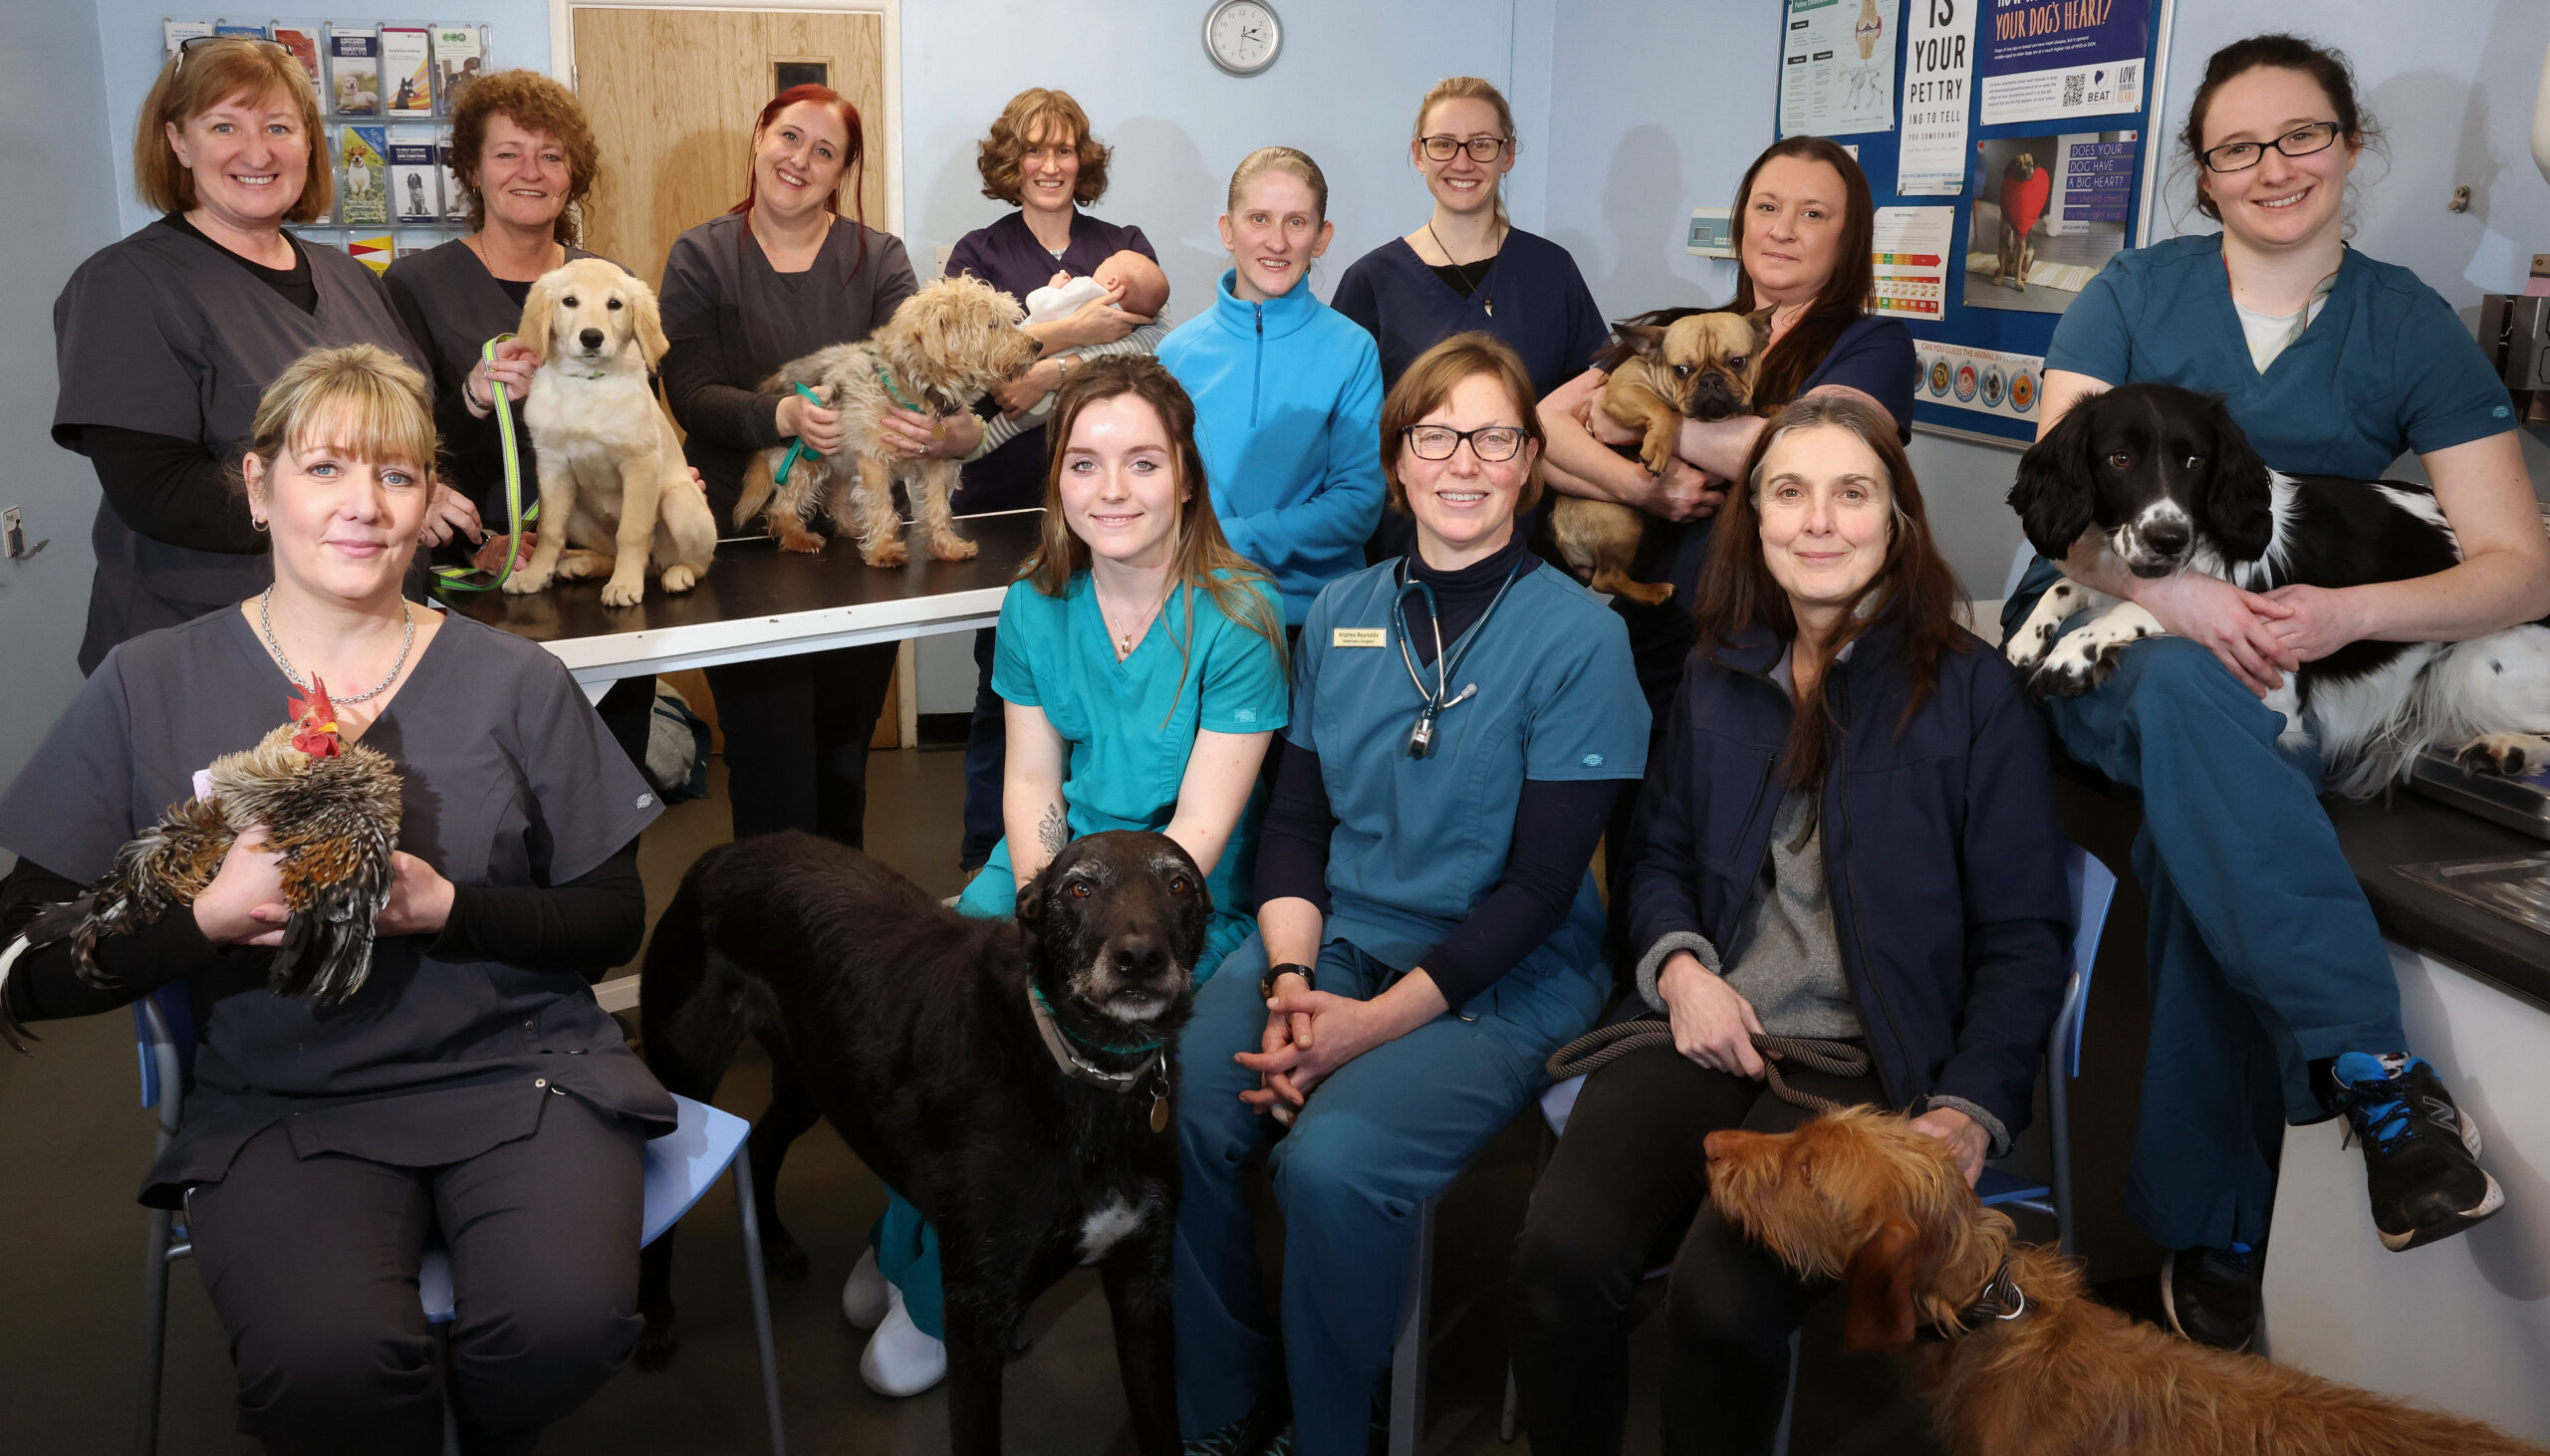 Archway Vets builds a paws-itive future under employee ownership